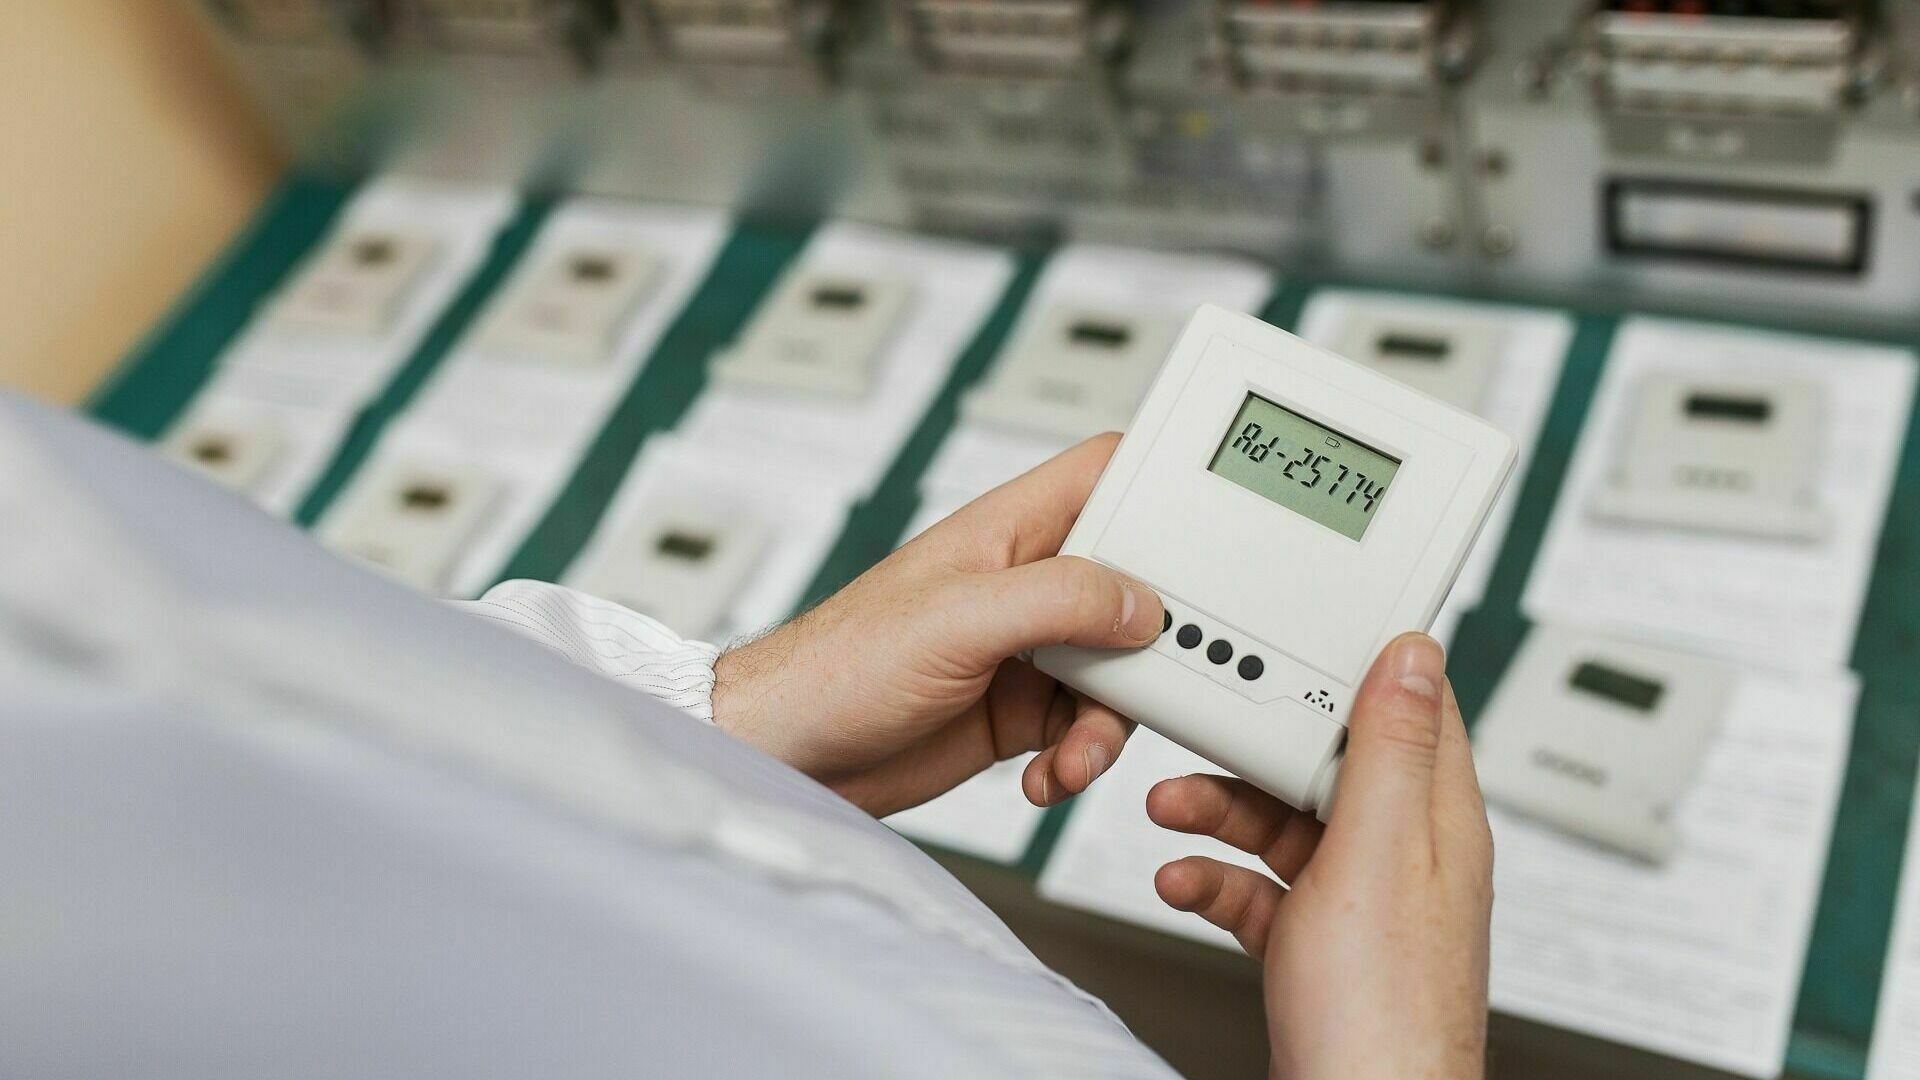 Count and rule: what is the main secret of smart electricity meters